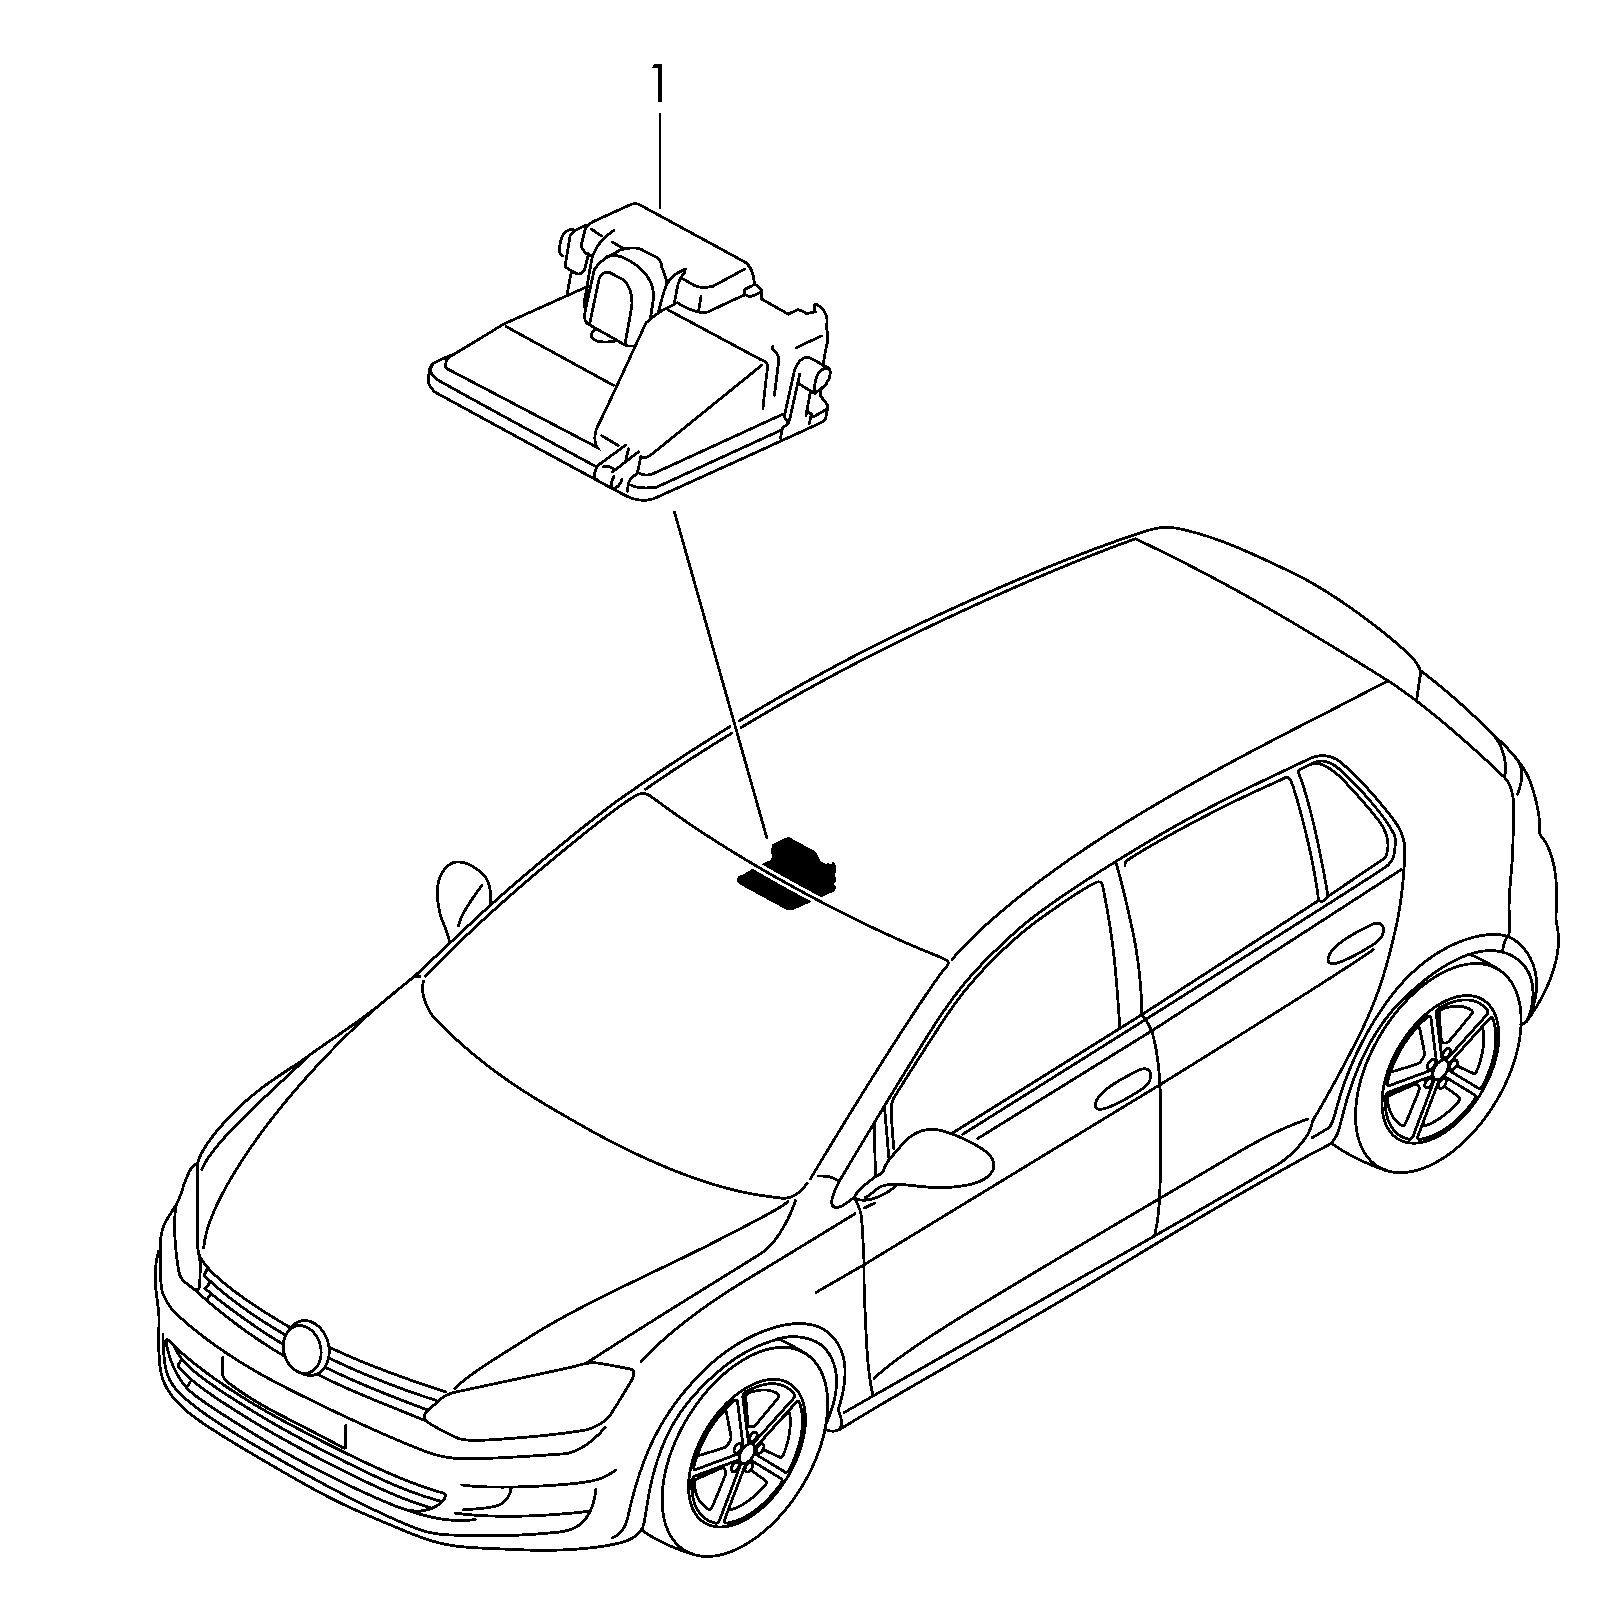 Control unit with camera for<br>traffic sign recognition,<br>dynamic high-beam headlight,<br>high-beam assistant and Lane<br>Assist  - e-Golf - goe